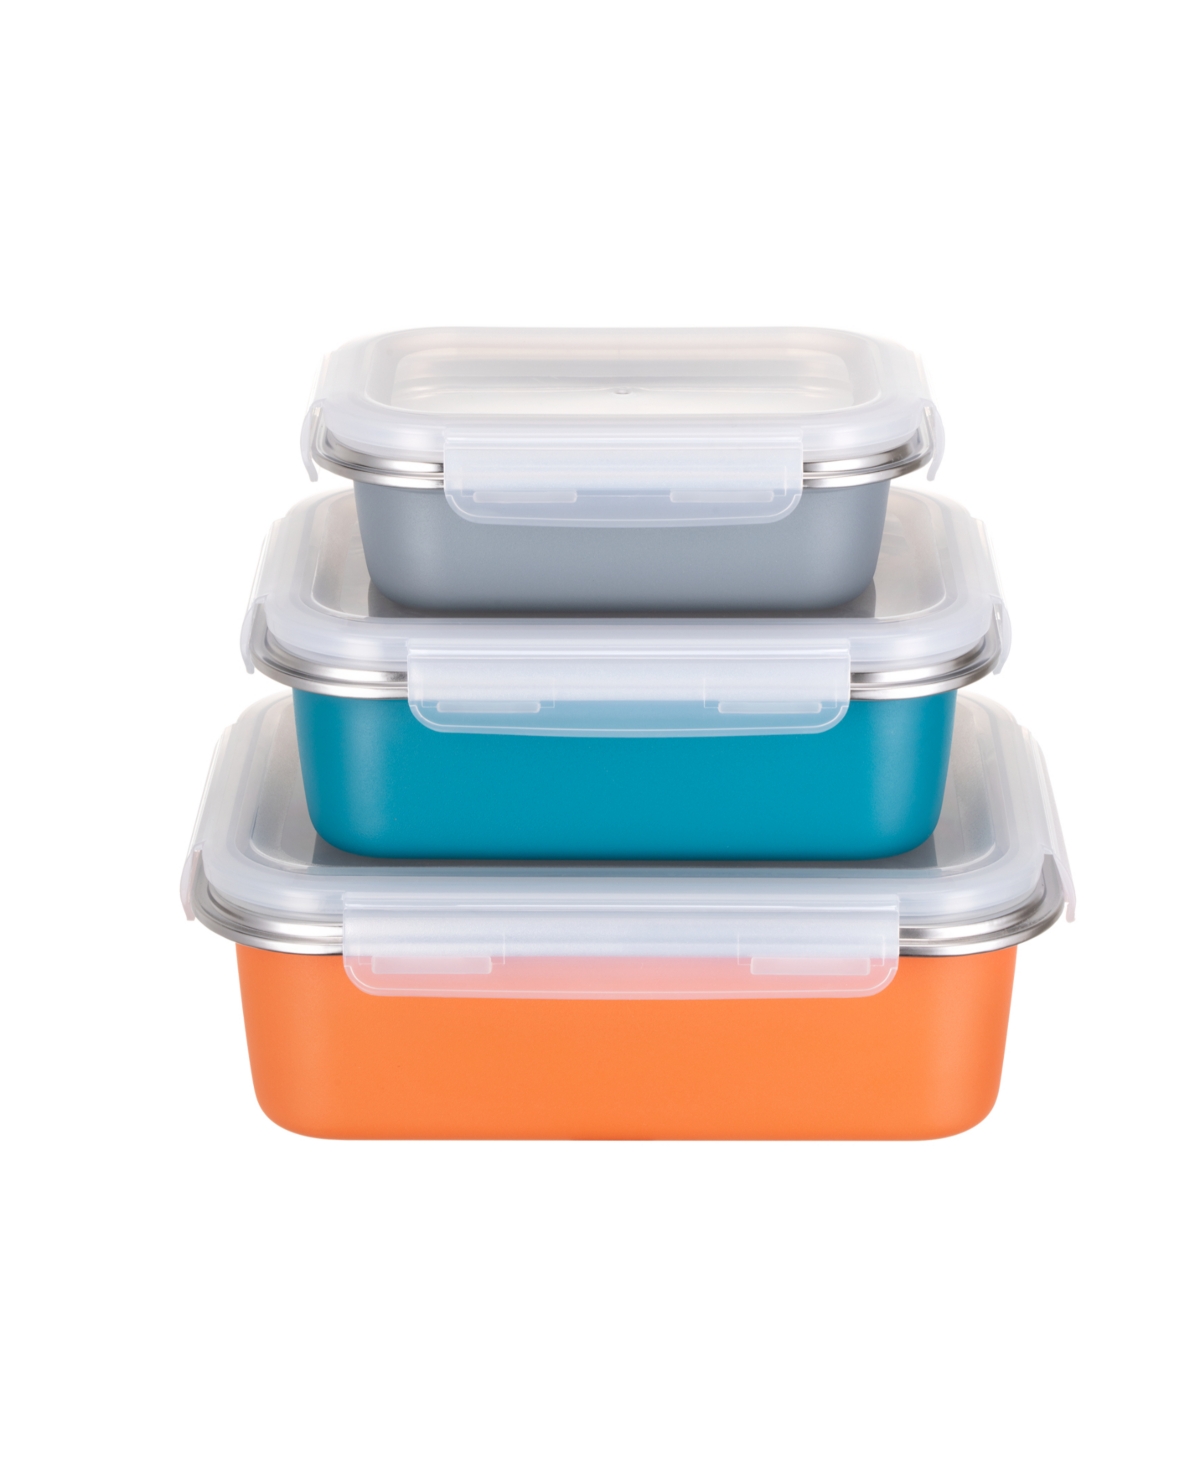 Genicook 3 Pc Container Nestable Stainless Steel Set With Locking Lids In Multicolor